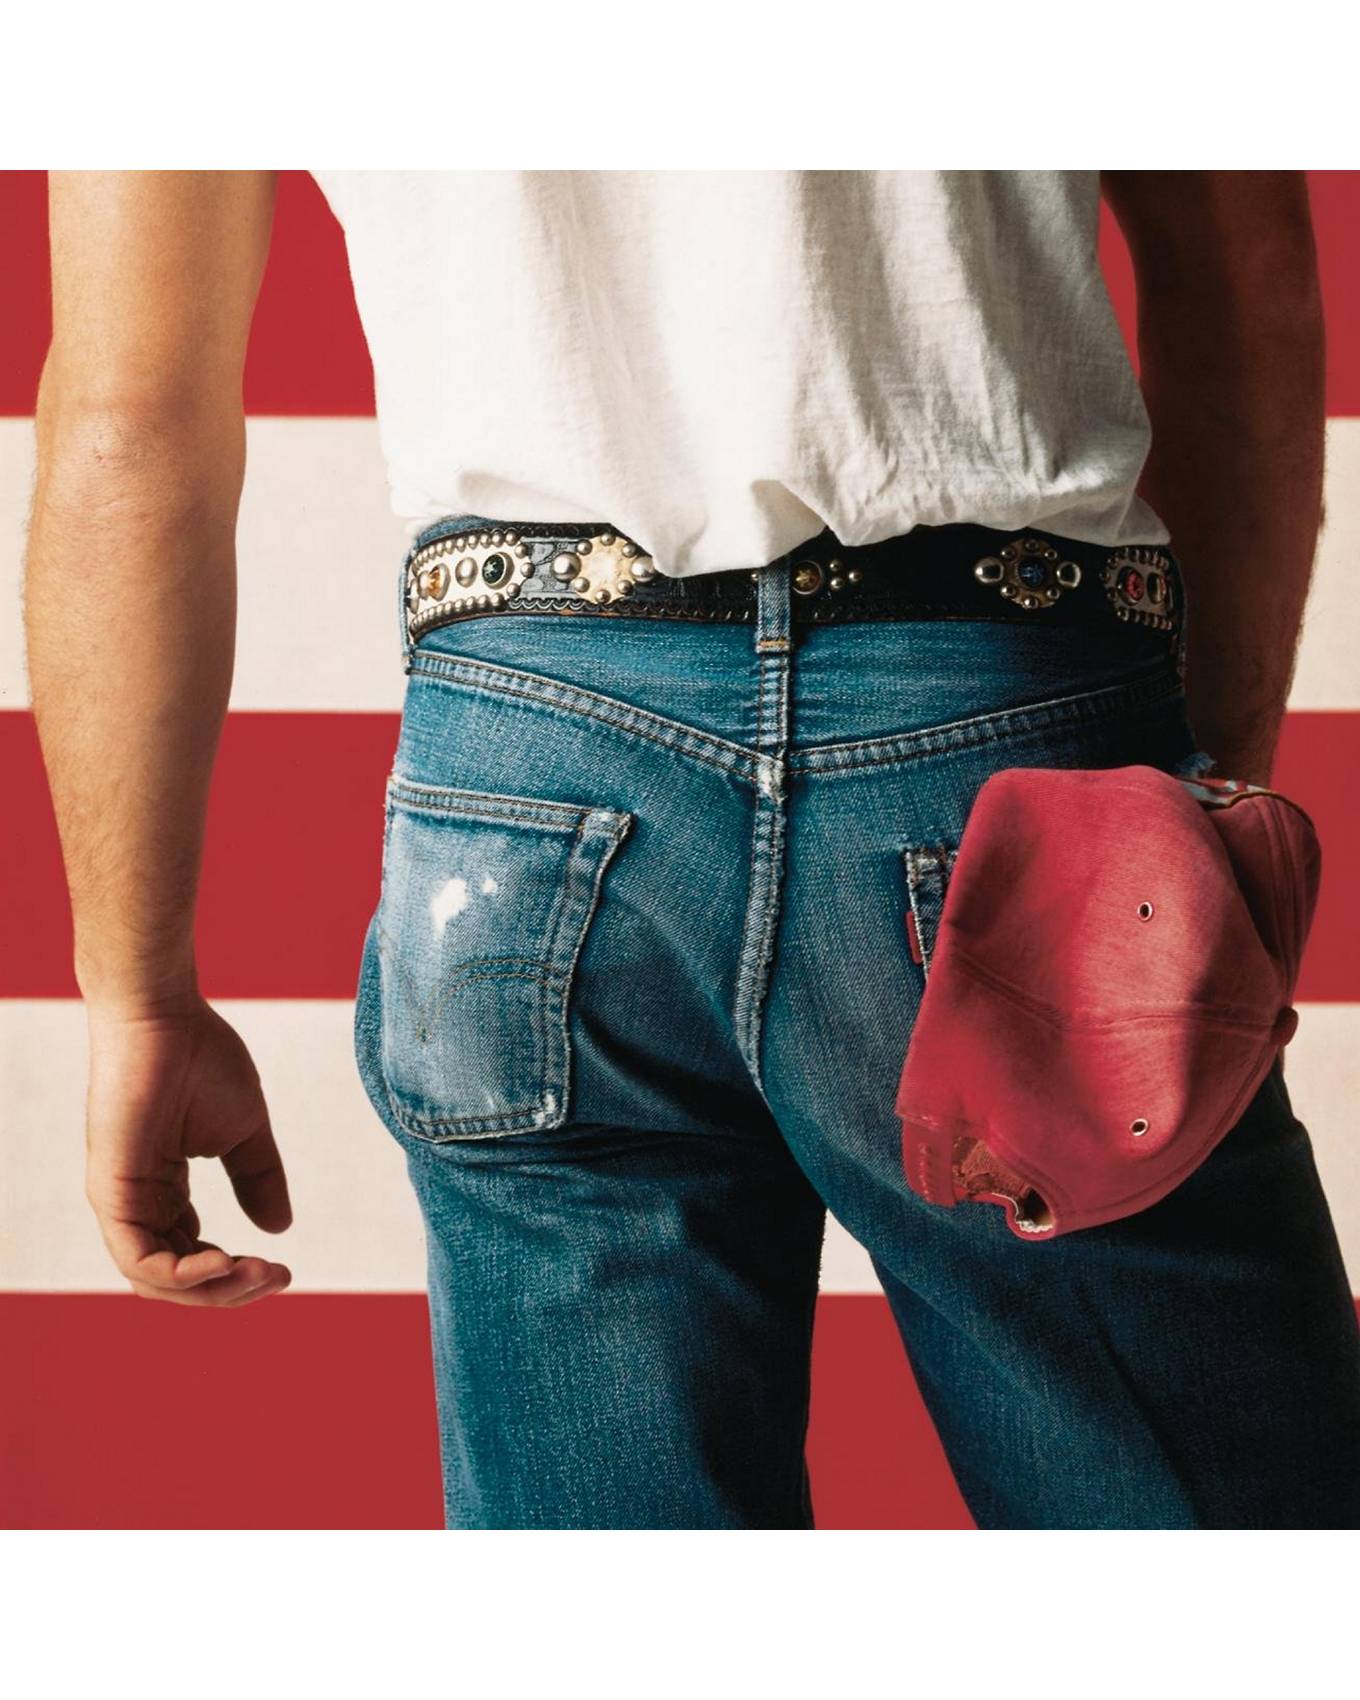 man standing in front of american flag with denim jeans and white shirt. facing backwards.